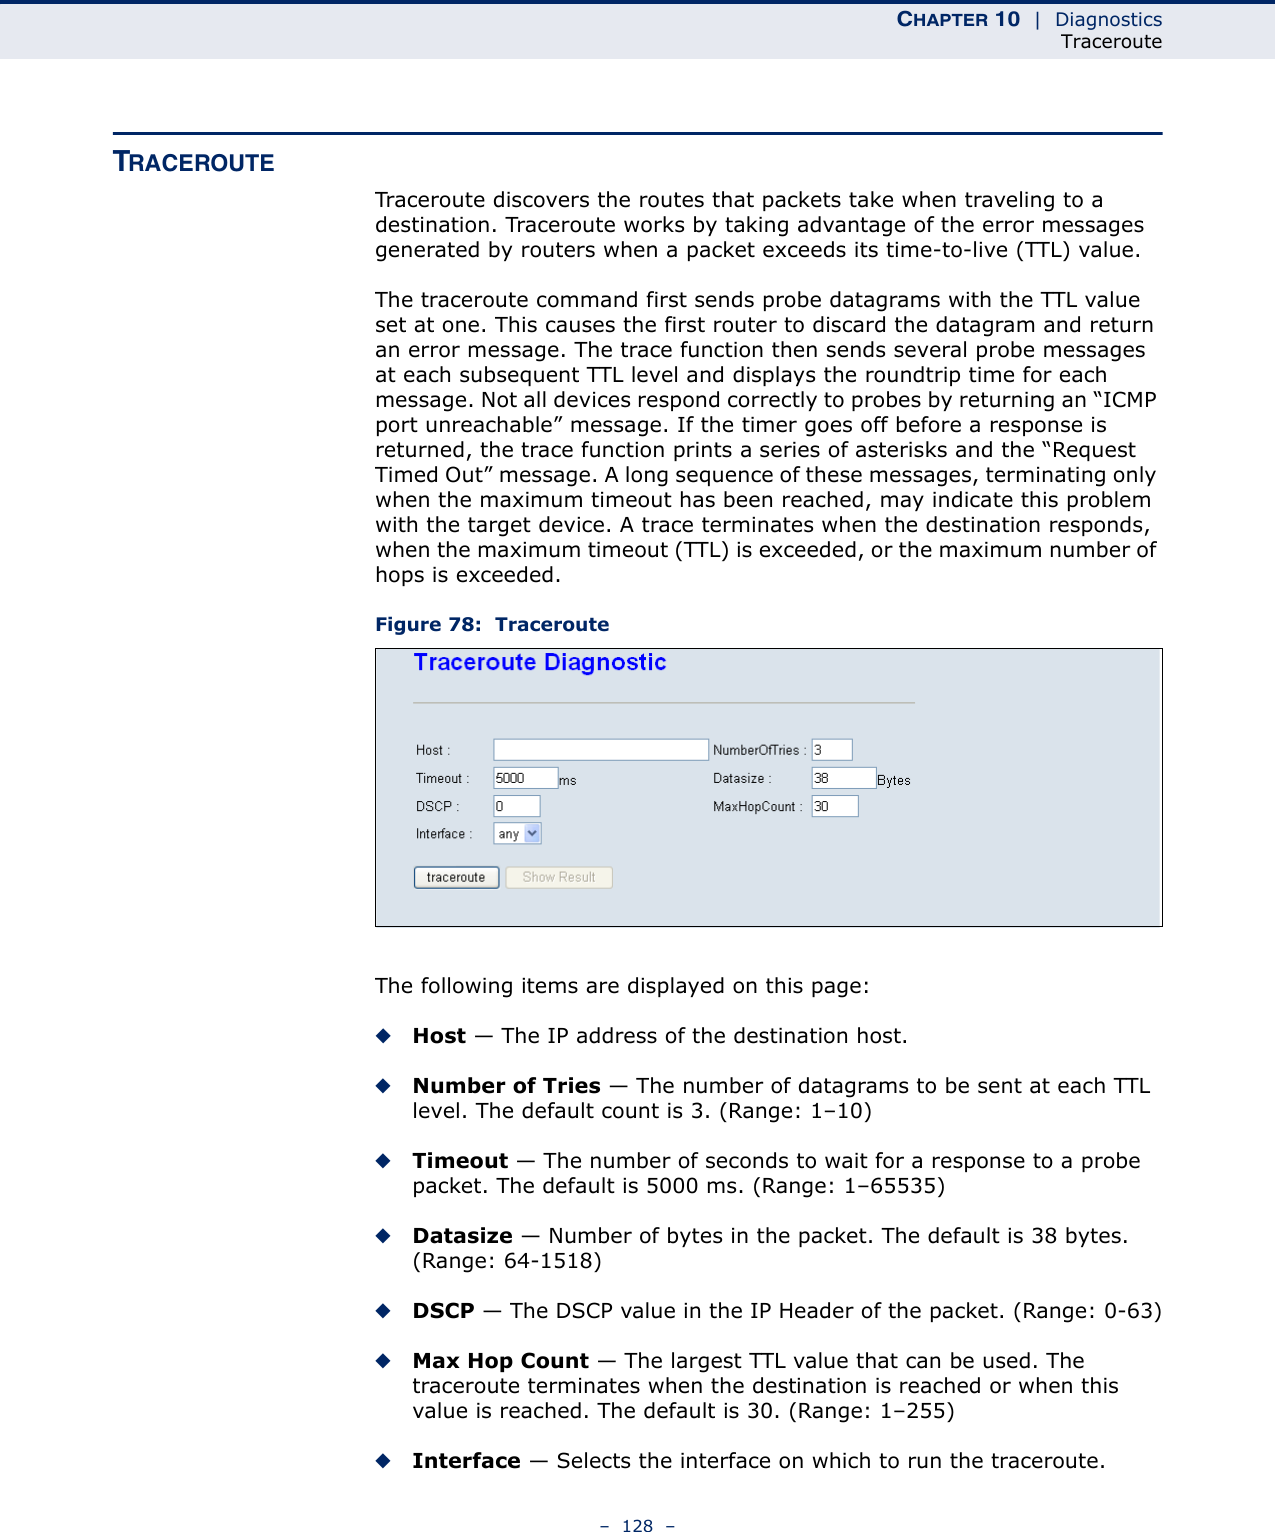 CHAPTER 10  |  DiagnosticsTraceroute–  128  –TRACEROUTETraceroute discovers the routes that packets take when traveling to a destination. Traceroute works by taking advantage of the error messages generated by routers when a packet exceeds its time-to-live (TTL) value.The traceroute command first sends probe datagrams with the TTL value set at one. This causes the first router to discard the datagram and return an error message. The trace function then sends several probe messages at each subsequent TTL level and displays the roundtrip time for each message. Not all devices respond correctly to probes by returning an “ICMP port unreachable” message. If the timer goes off before a response is returned, the trace function prints a series of asterisks and the “Request Timed Out” message. A long sequence of these messages, terminating only when the maximum timeout has been reached, may indicate this problem with the target device. A trace terminates when the destination responds, when the maximum timeout (TTL) is exceeded, or the maximum number of hops is exceeded.Figure 78:  TracerouteThe following items are displayed on this page:◆Host — The IP address of the destination host.◆Number of Tries — The number of datagrams to be sent at each TTL level. The default count is 3. (Range: 1–10)◆Timeout — The number of seconds to wait for a response to a probe packet. The default is 5000 ms. (Range: 1–65535)◆Datasize — Number of bytes in the packet. The default is 38 bytes. (Range: 64-1518)◆DSCP — The DSCP value in the IP Header of the packet. (Range: 0-63)◆Max Hop Count — The largest TTL value that can be used. The traceroute terminates when the destination is reached or when this value is reached. The default is 30. (Range: 1–255)◆Interface — Selects the interface on which to run the traceroute.